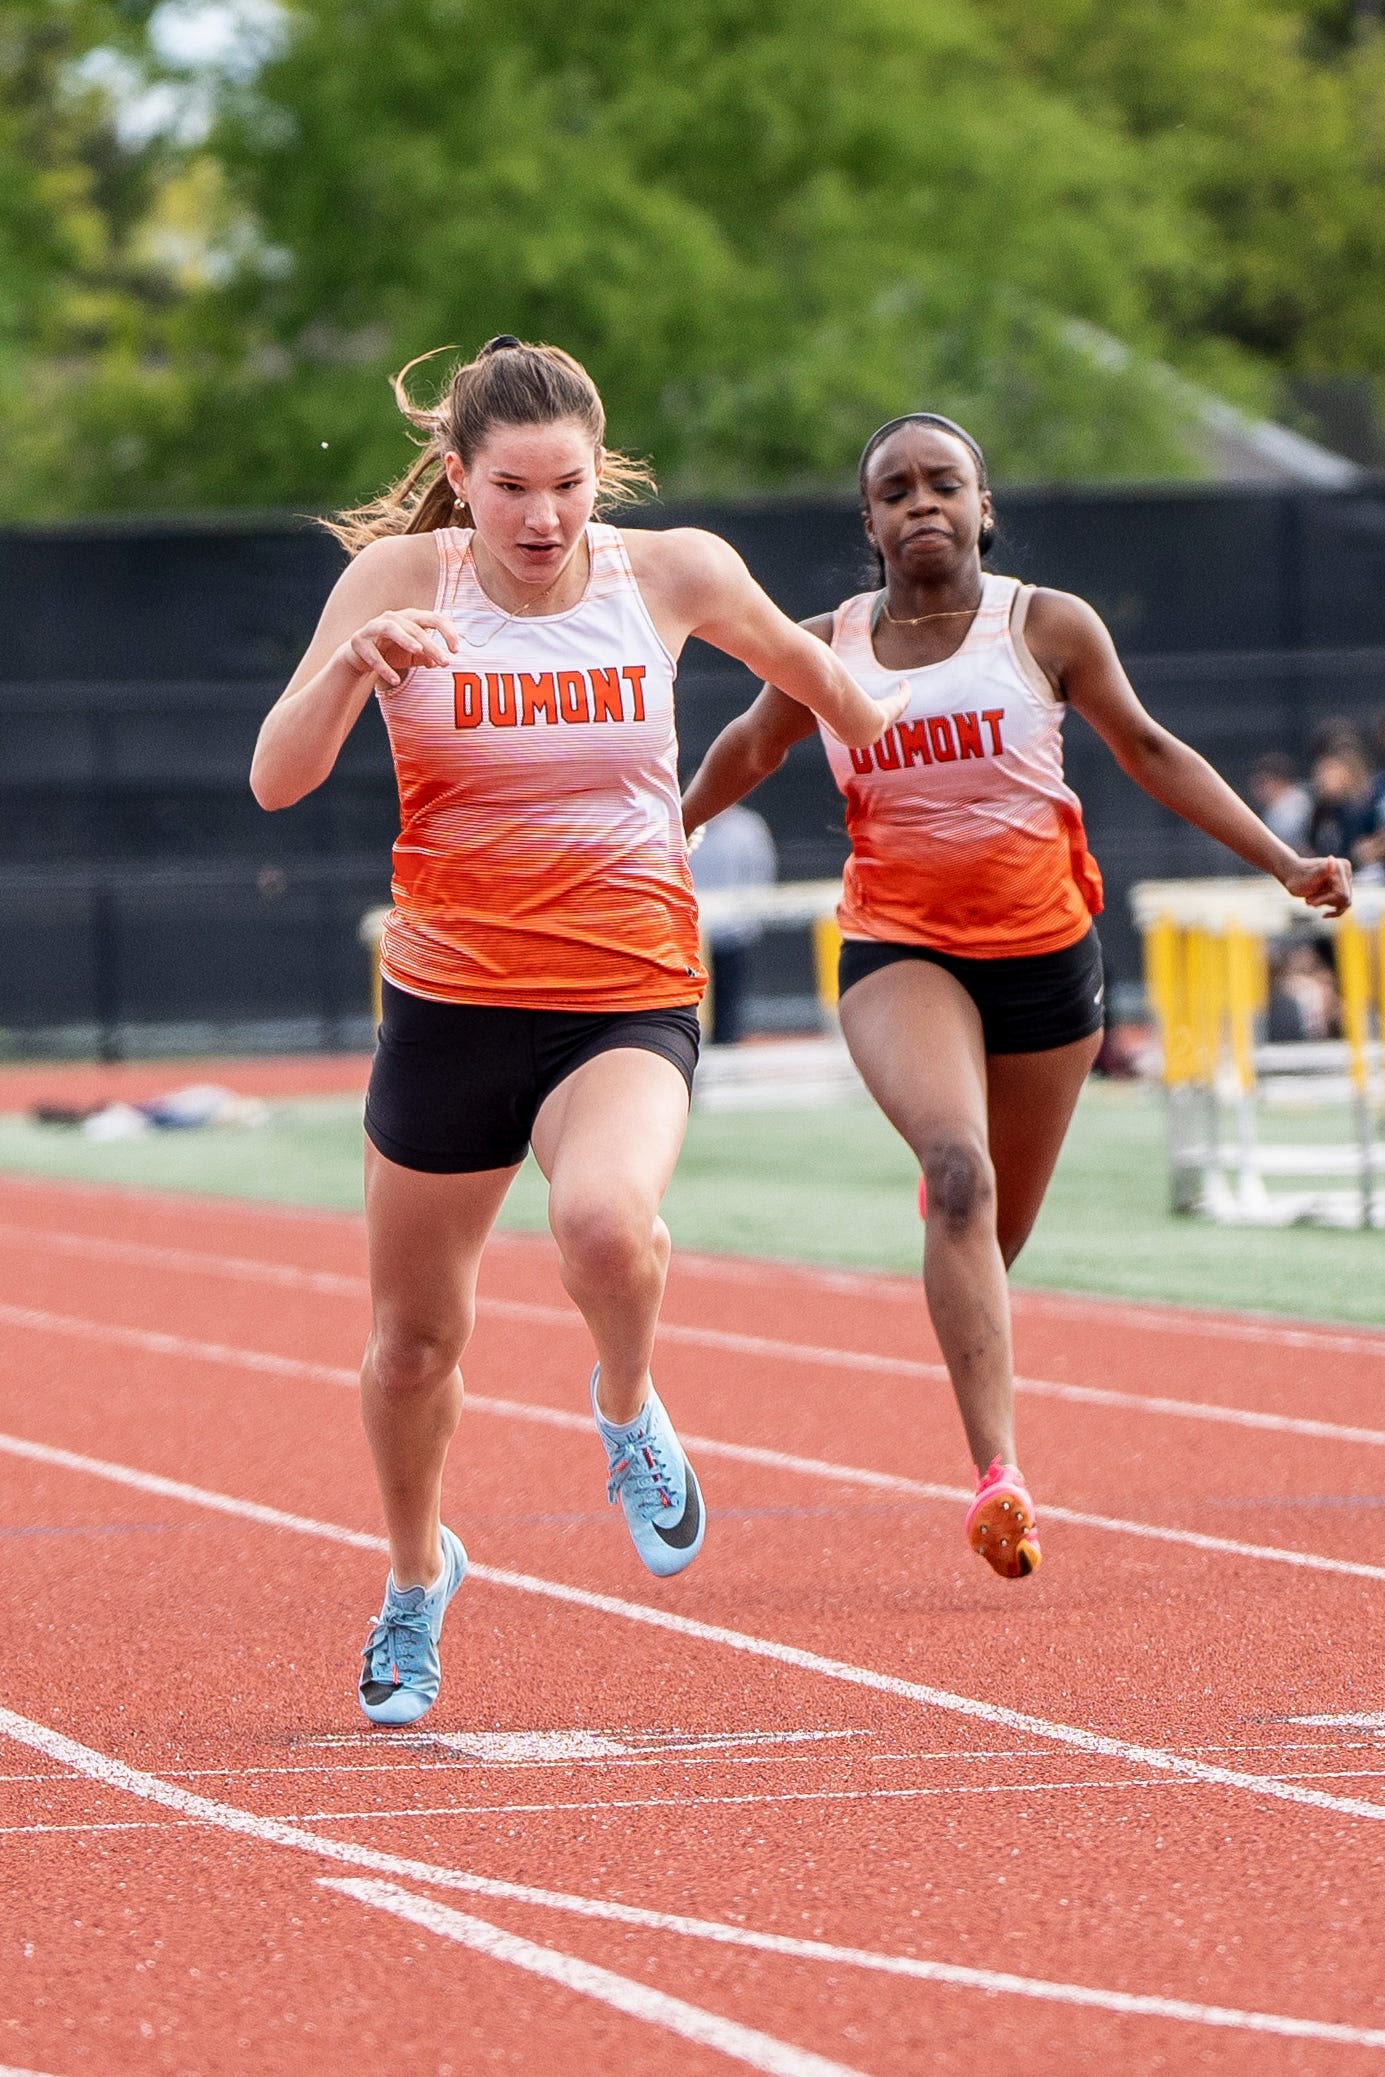 Track: Highlights from the Big North Championships